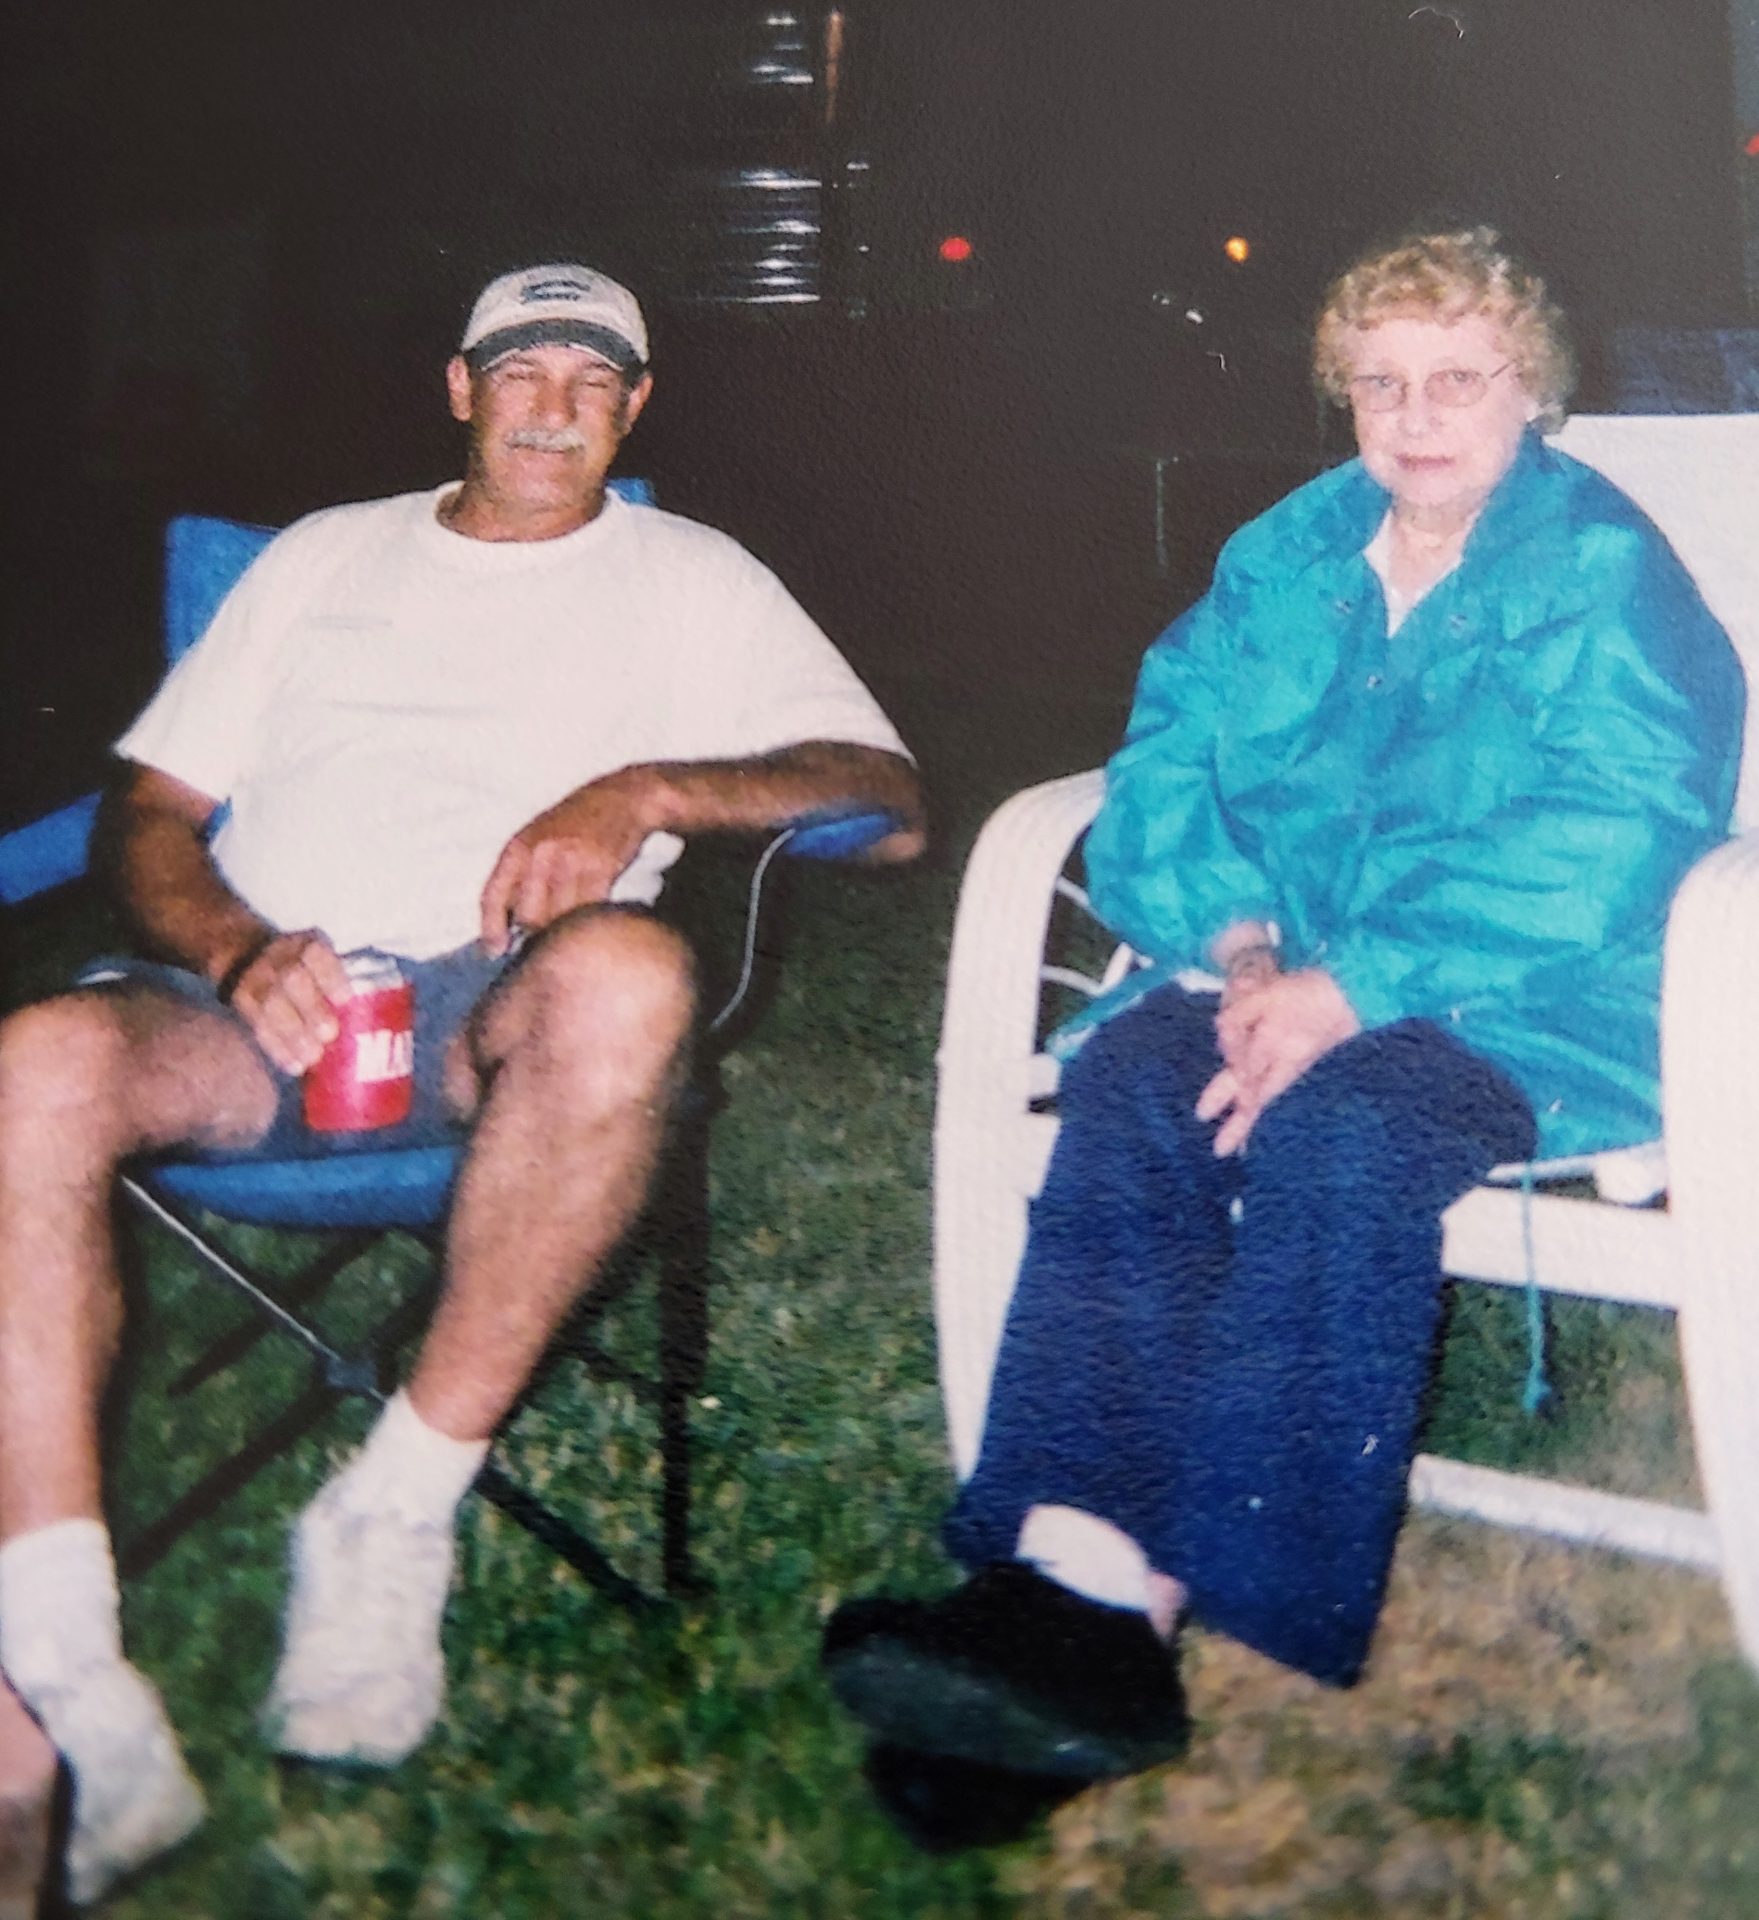 Bob and his mom, Mary Cartino by the camp fire